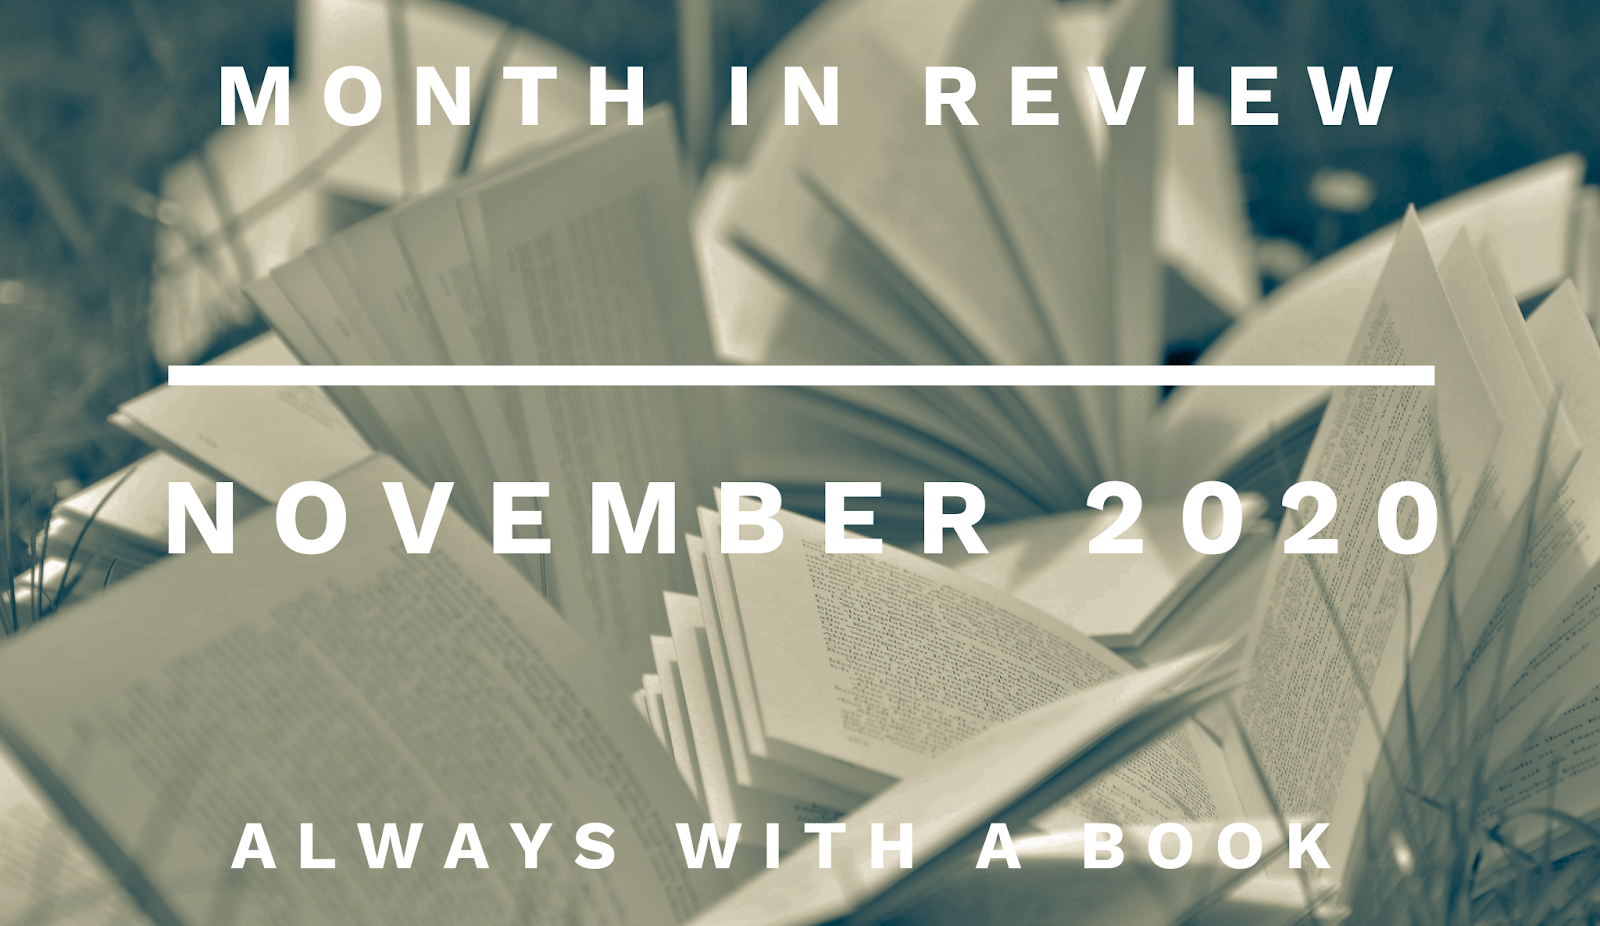 Month in Review: November 2020